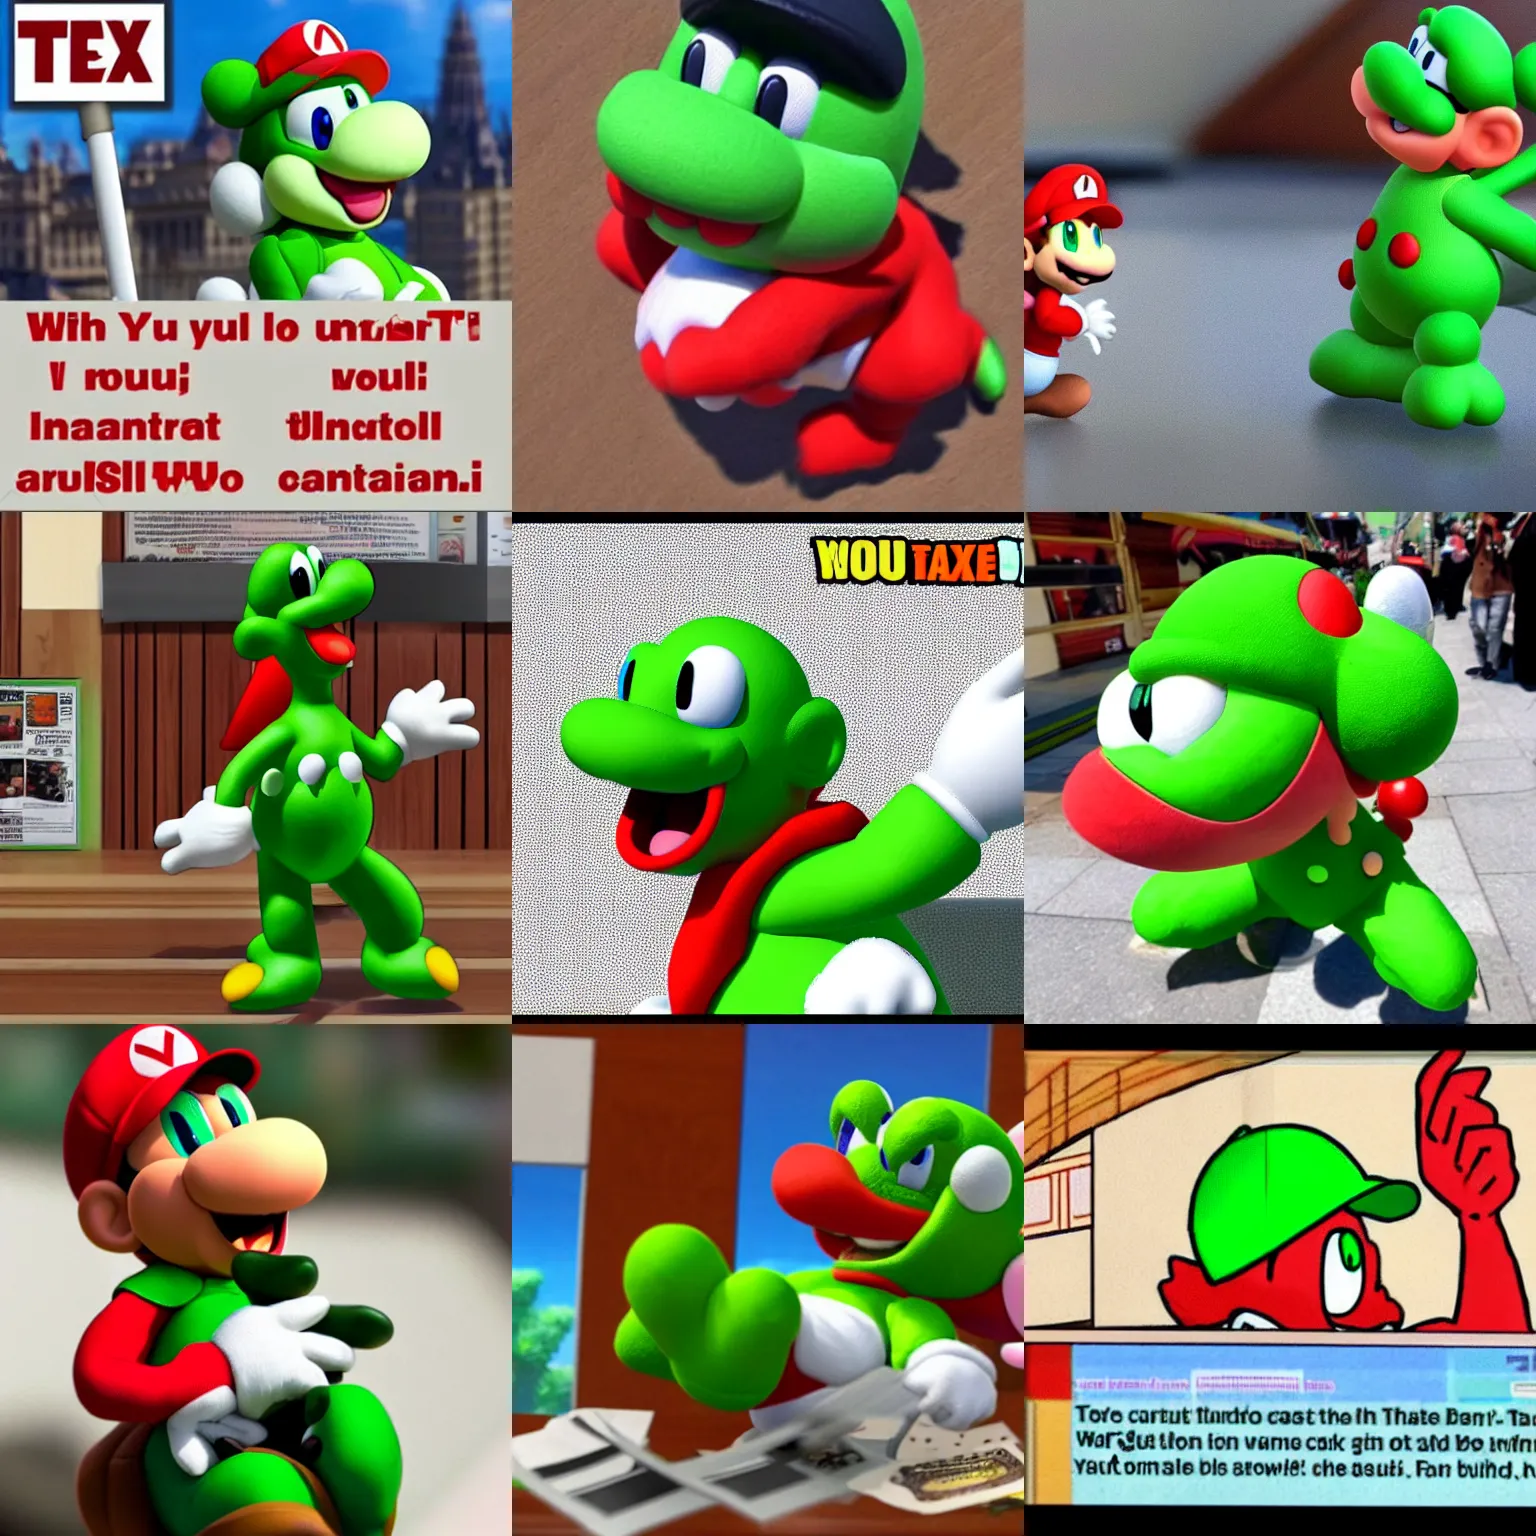 Prompt: yoshi commits tax fraud, busted by irs, financial crimes, nintendo doesn't want you to see this image